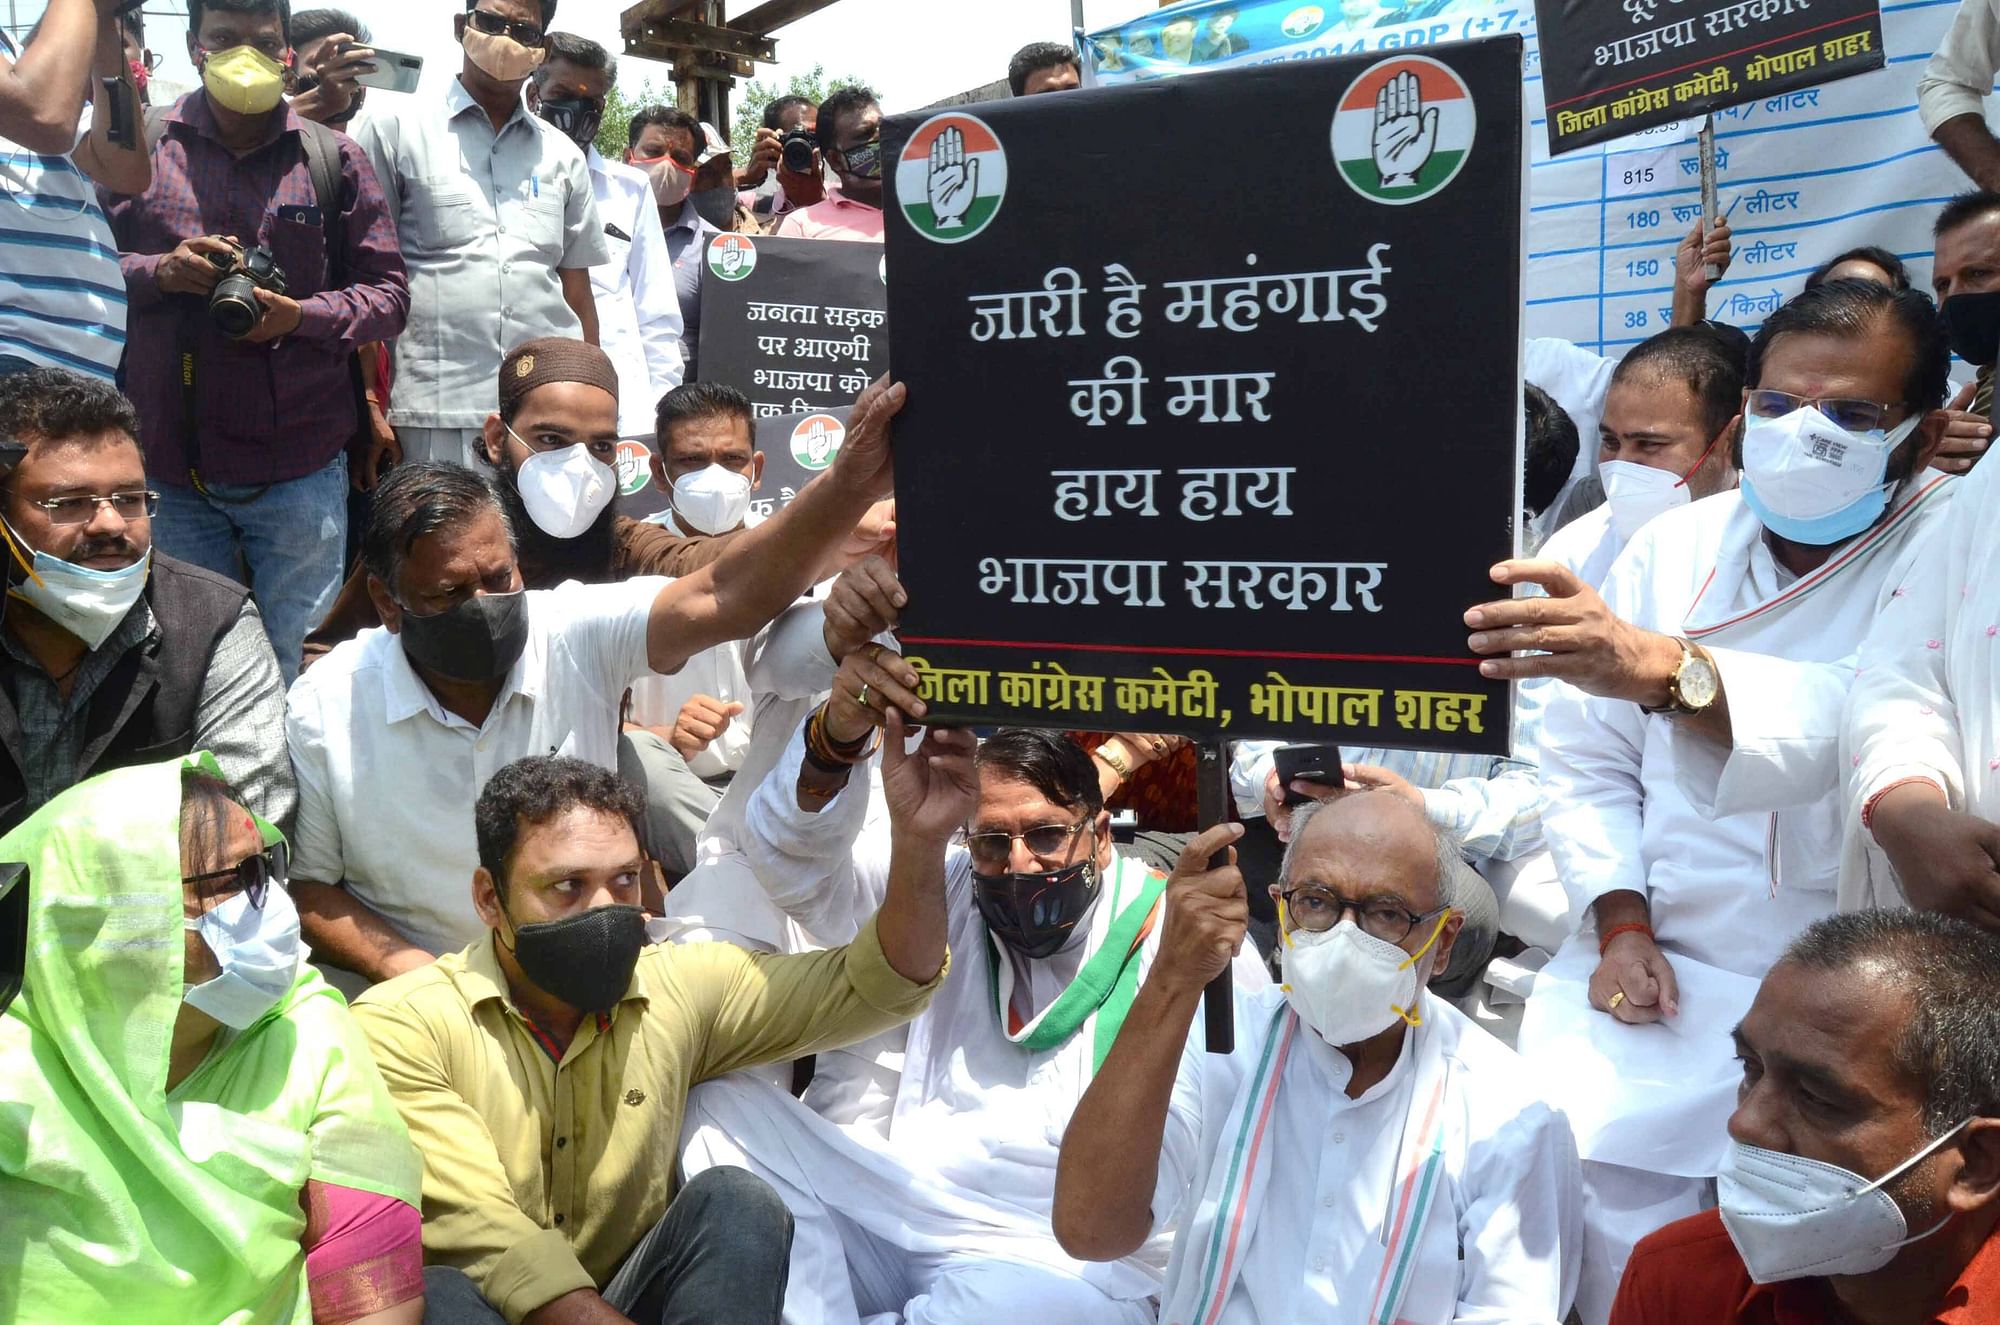 Bhopal: Congress leader and Rajya Sabha MP Digvijay Singh along with activists protest against frequent hikes in the prices of petrol and diesel, and demand the roll back of prices, in front of a fuel station in Bhopal, Friday, June 11, 2021